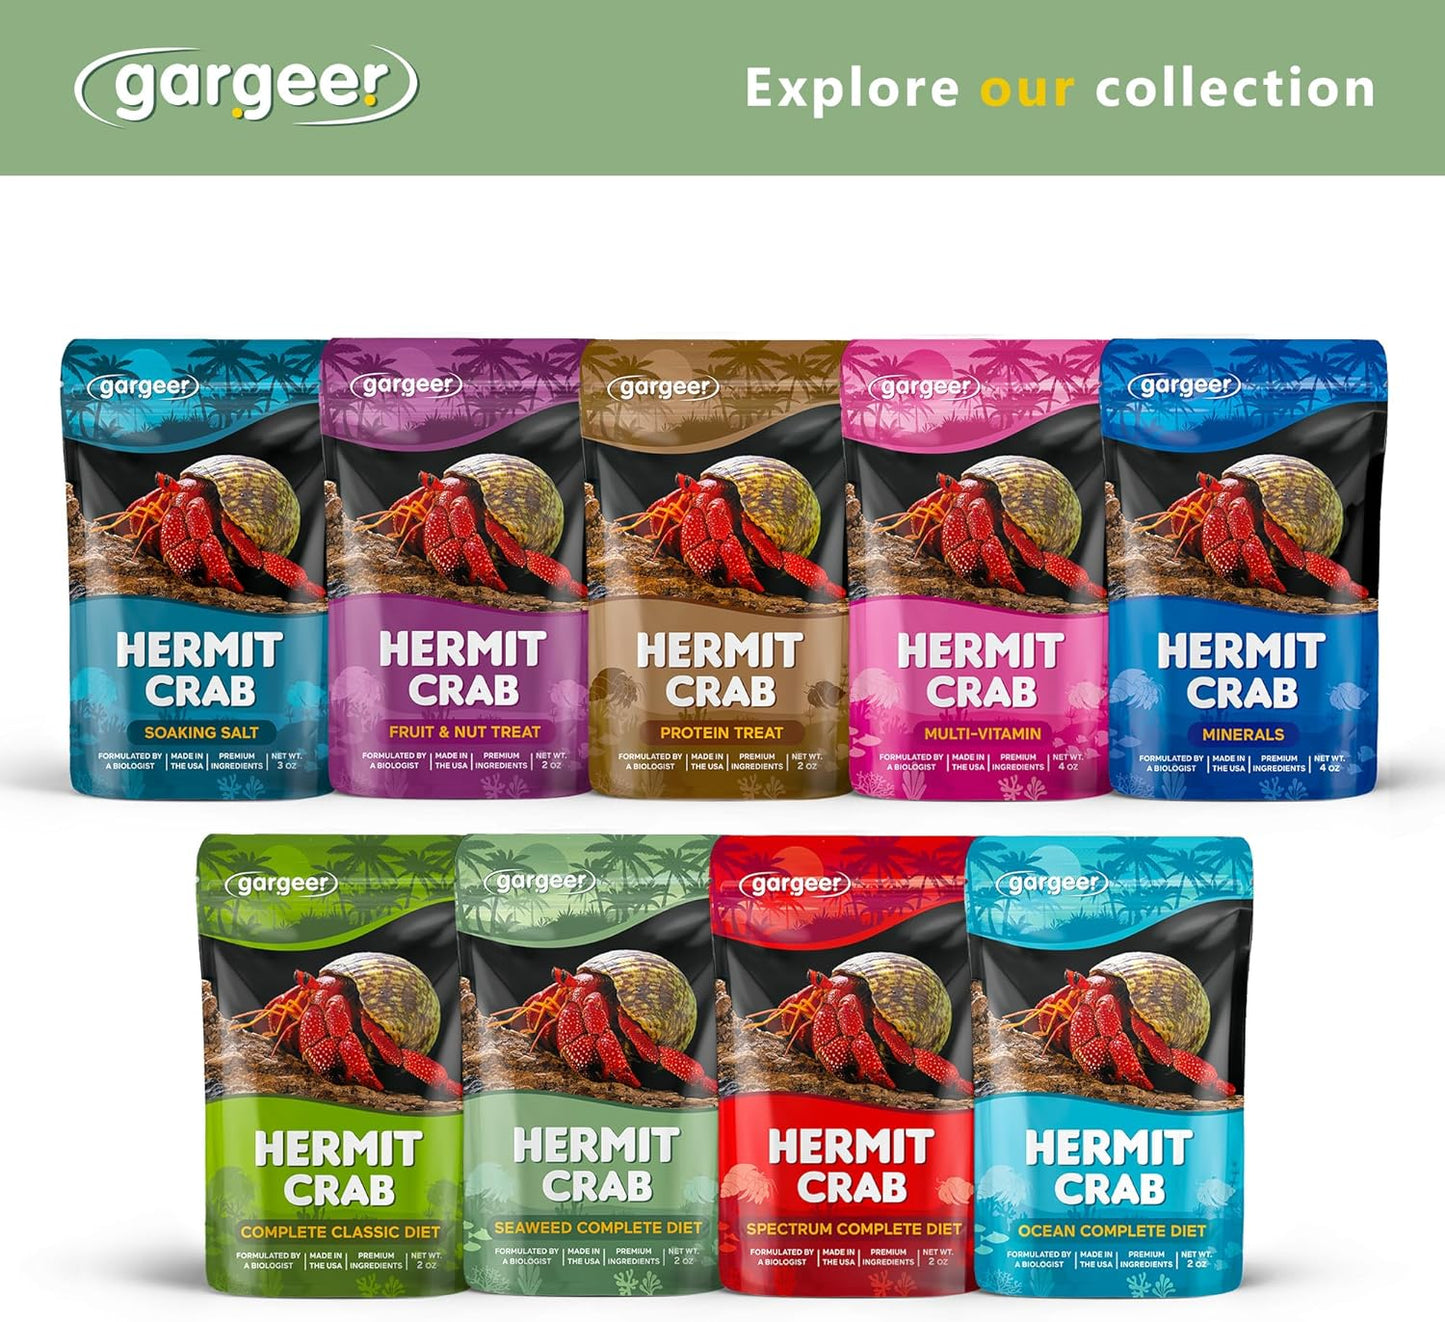 Gargeer 2oz Hermit Crab Seaweed Bounty Complete Diet. Easily Digested, Non-GMO Premium Ingredients Only. Strengthen Your Crab’s Exoskeleton, and Support All Nutritional and Immune System Needs. Enjoy!